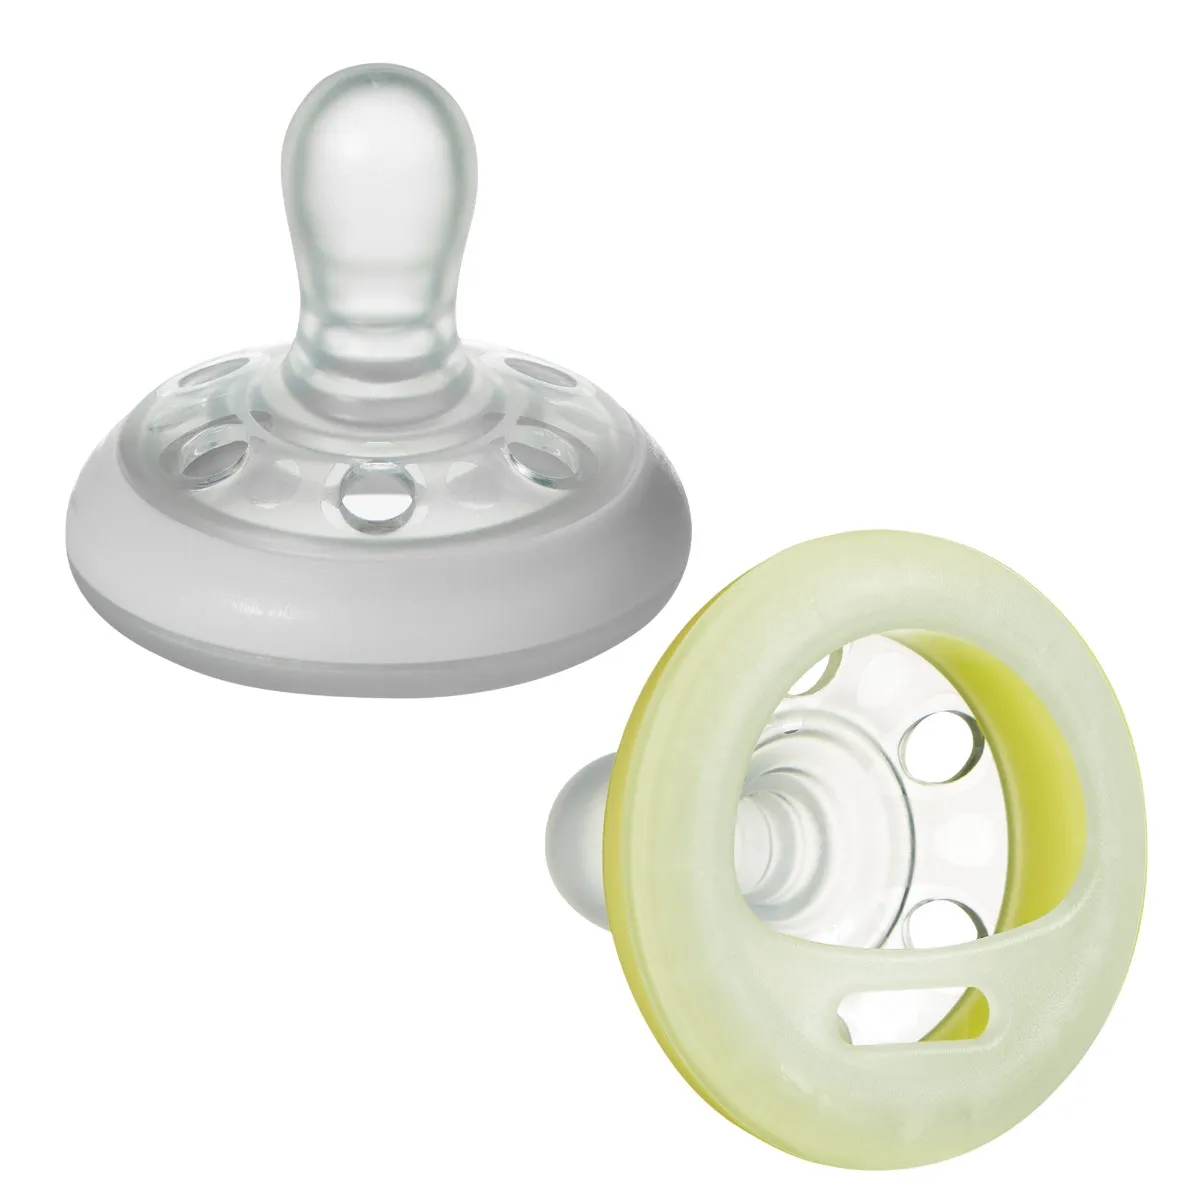 Tommee Tippee Closer to Nature Night Time Baby Pacifier - 0-6 month, Girl,  4 pack 